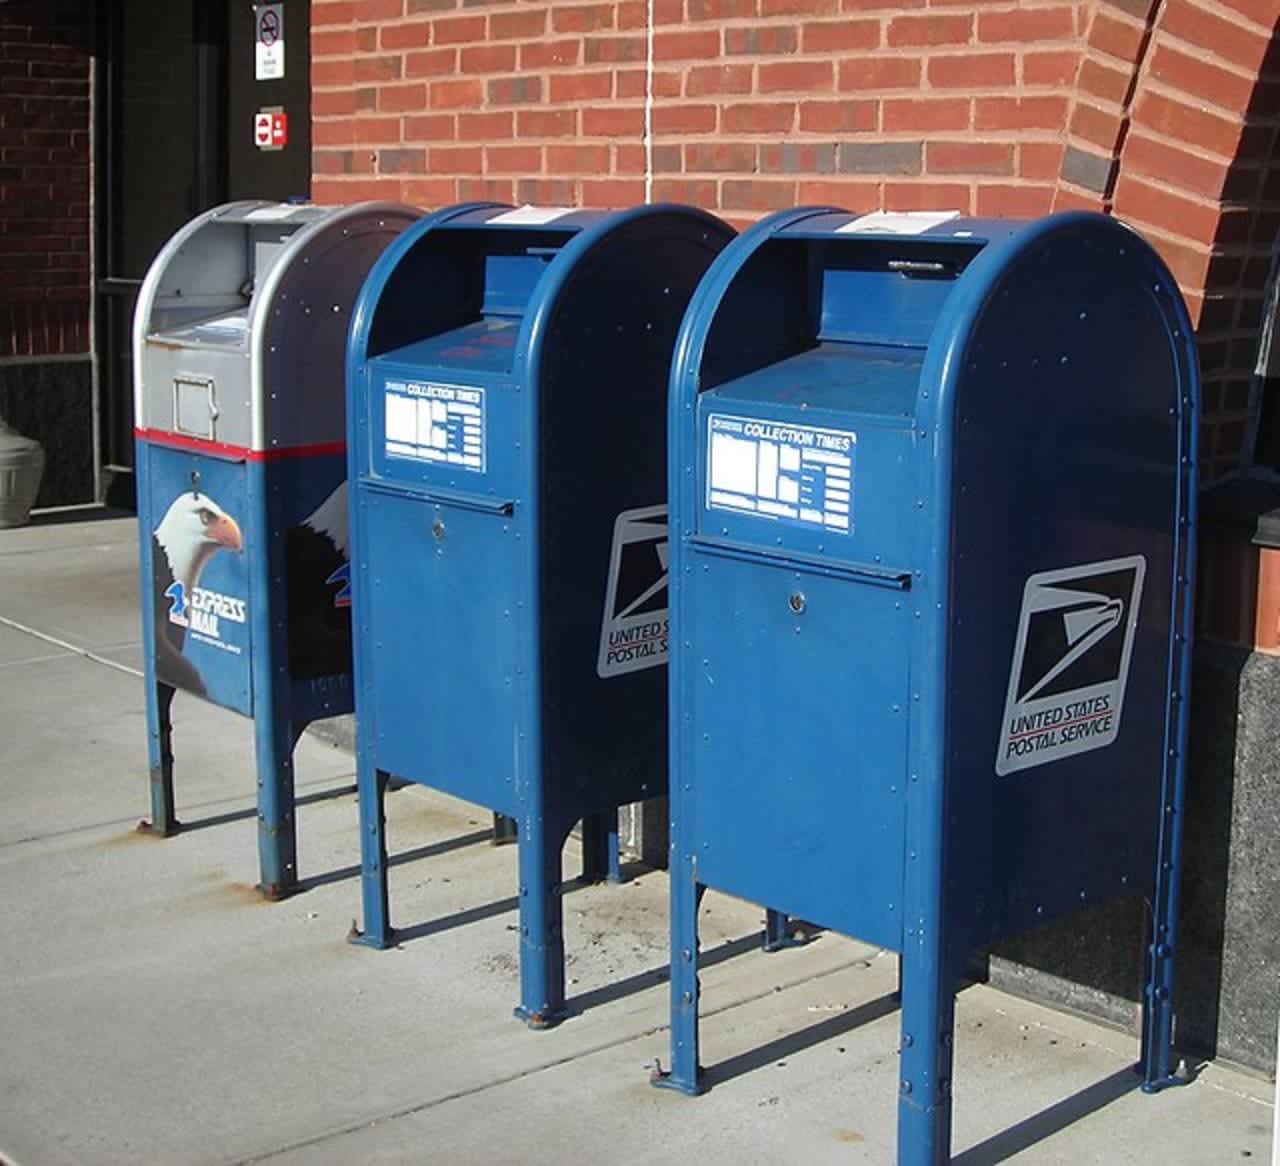 Two men attempted to rob a US postal worker in Greenwich.